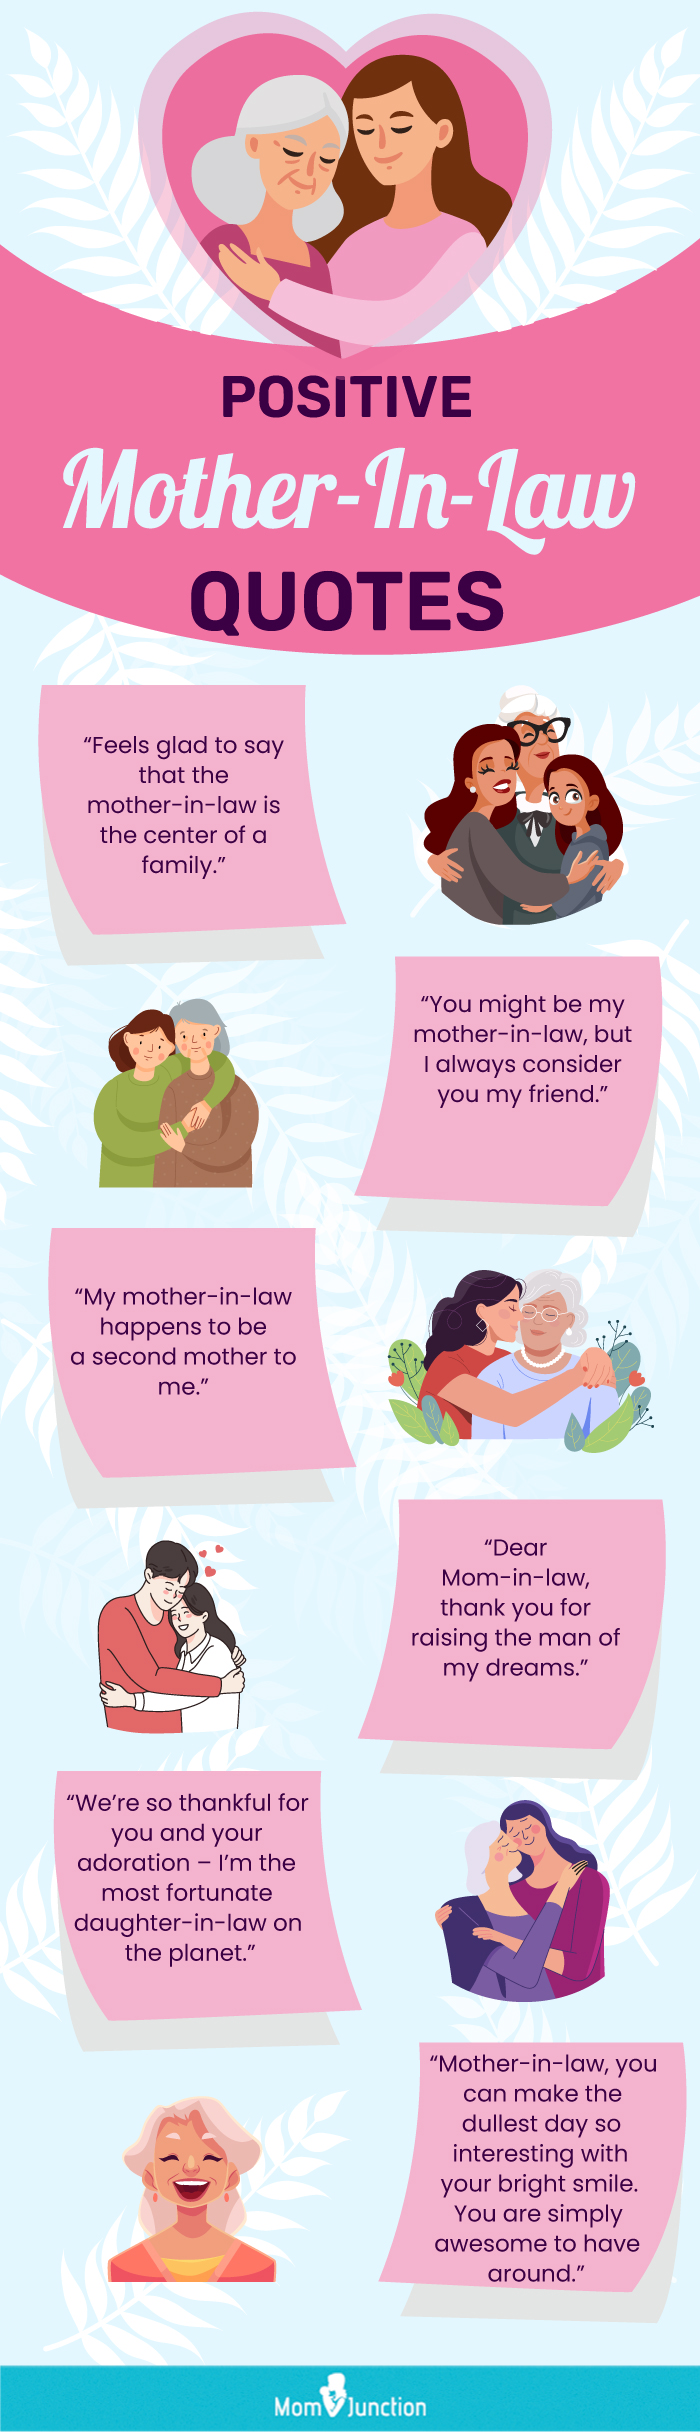 100 Best Positive Quotes About Mother-In-law image